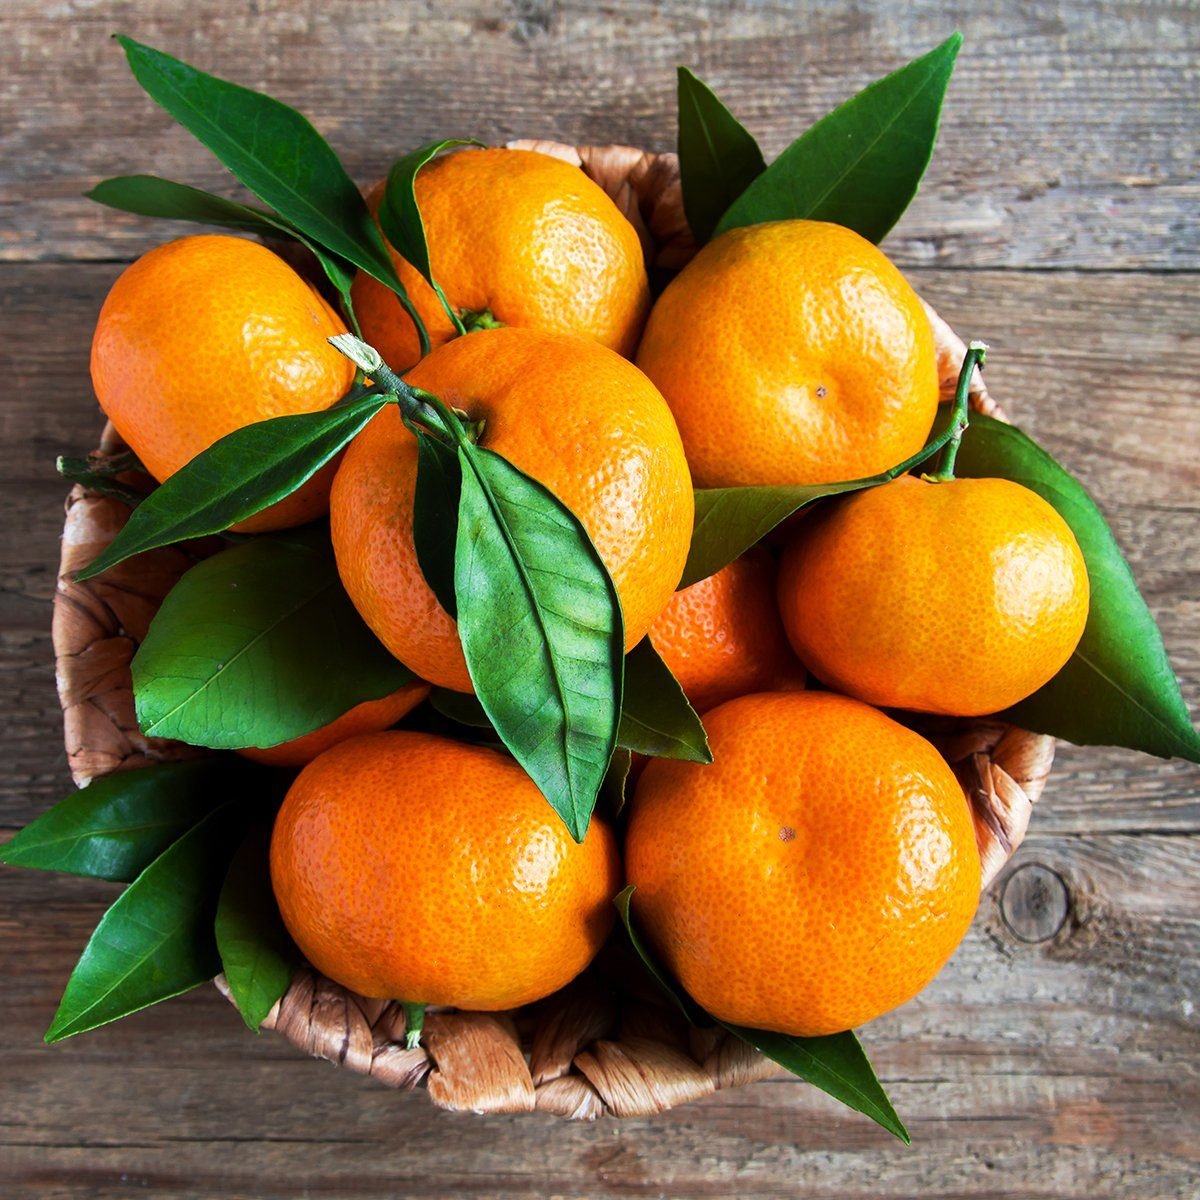 Tangerines (oranges, mandarins, clementines, citrus fruits) with leaves in basket over rustic wooden background